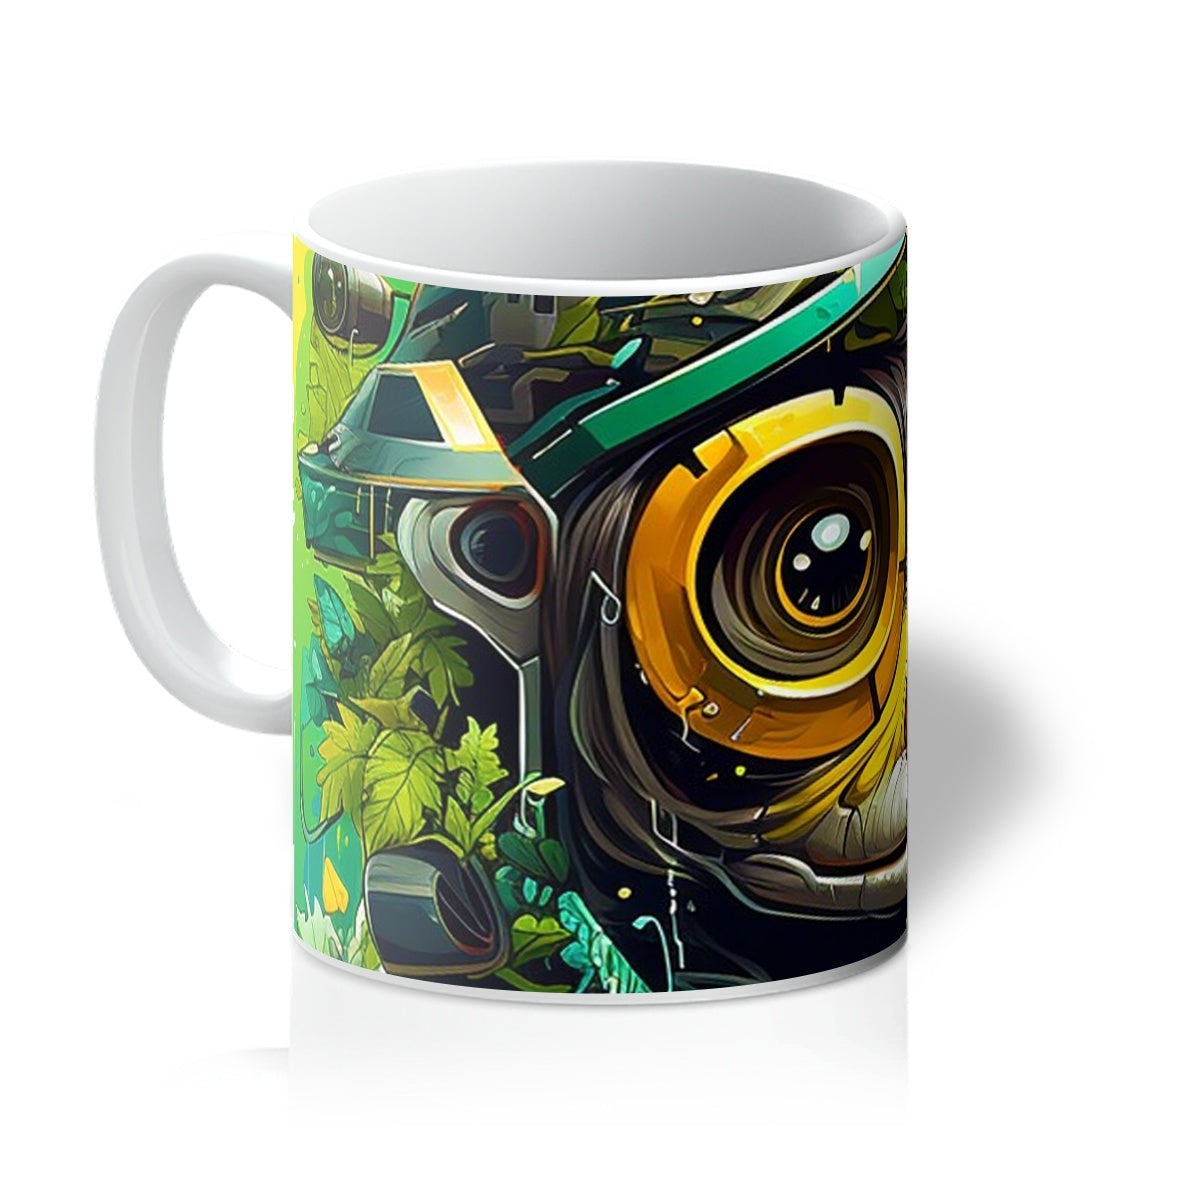 Nature's Resilience: Surreal Auto-Forest Artwork - Whimsical Raccoon and Greenery Infused Car  Mug